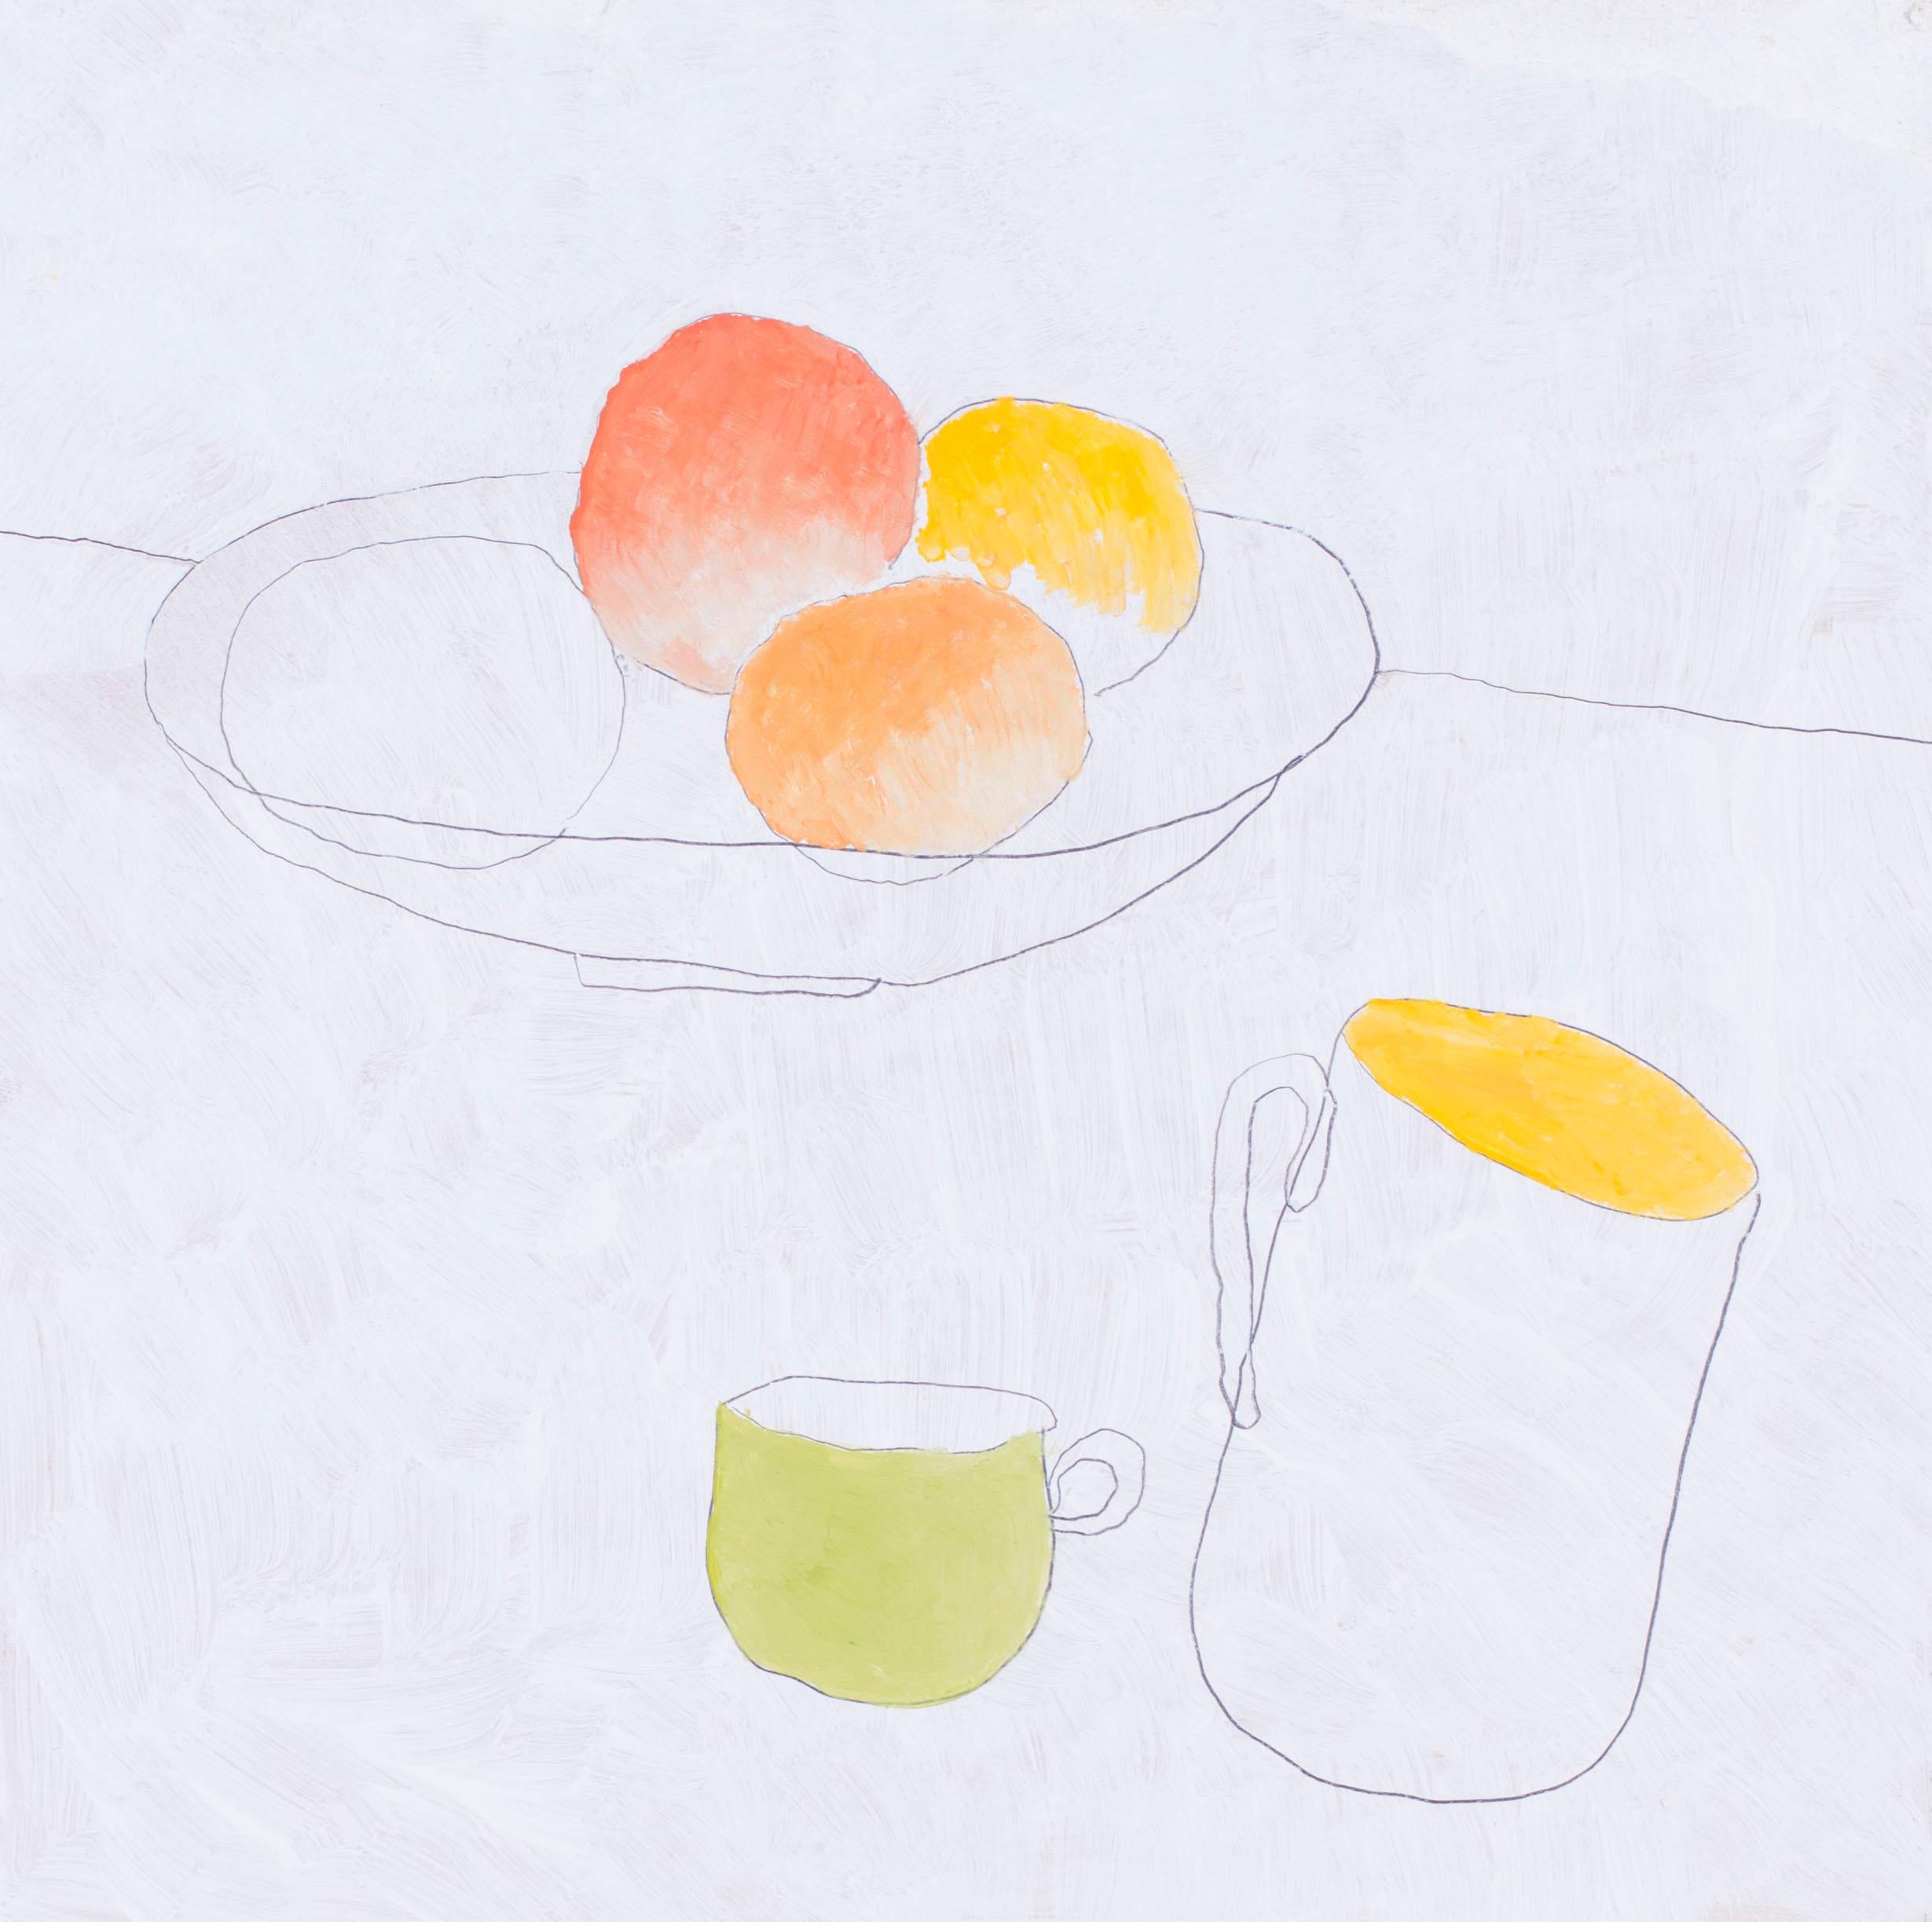 British, 21st Century abstract still life 'Fruit and cups' - Painting by Max Andrews